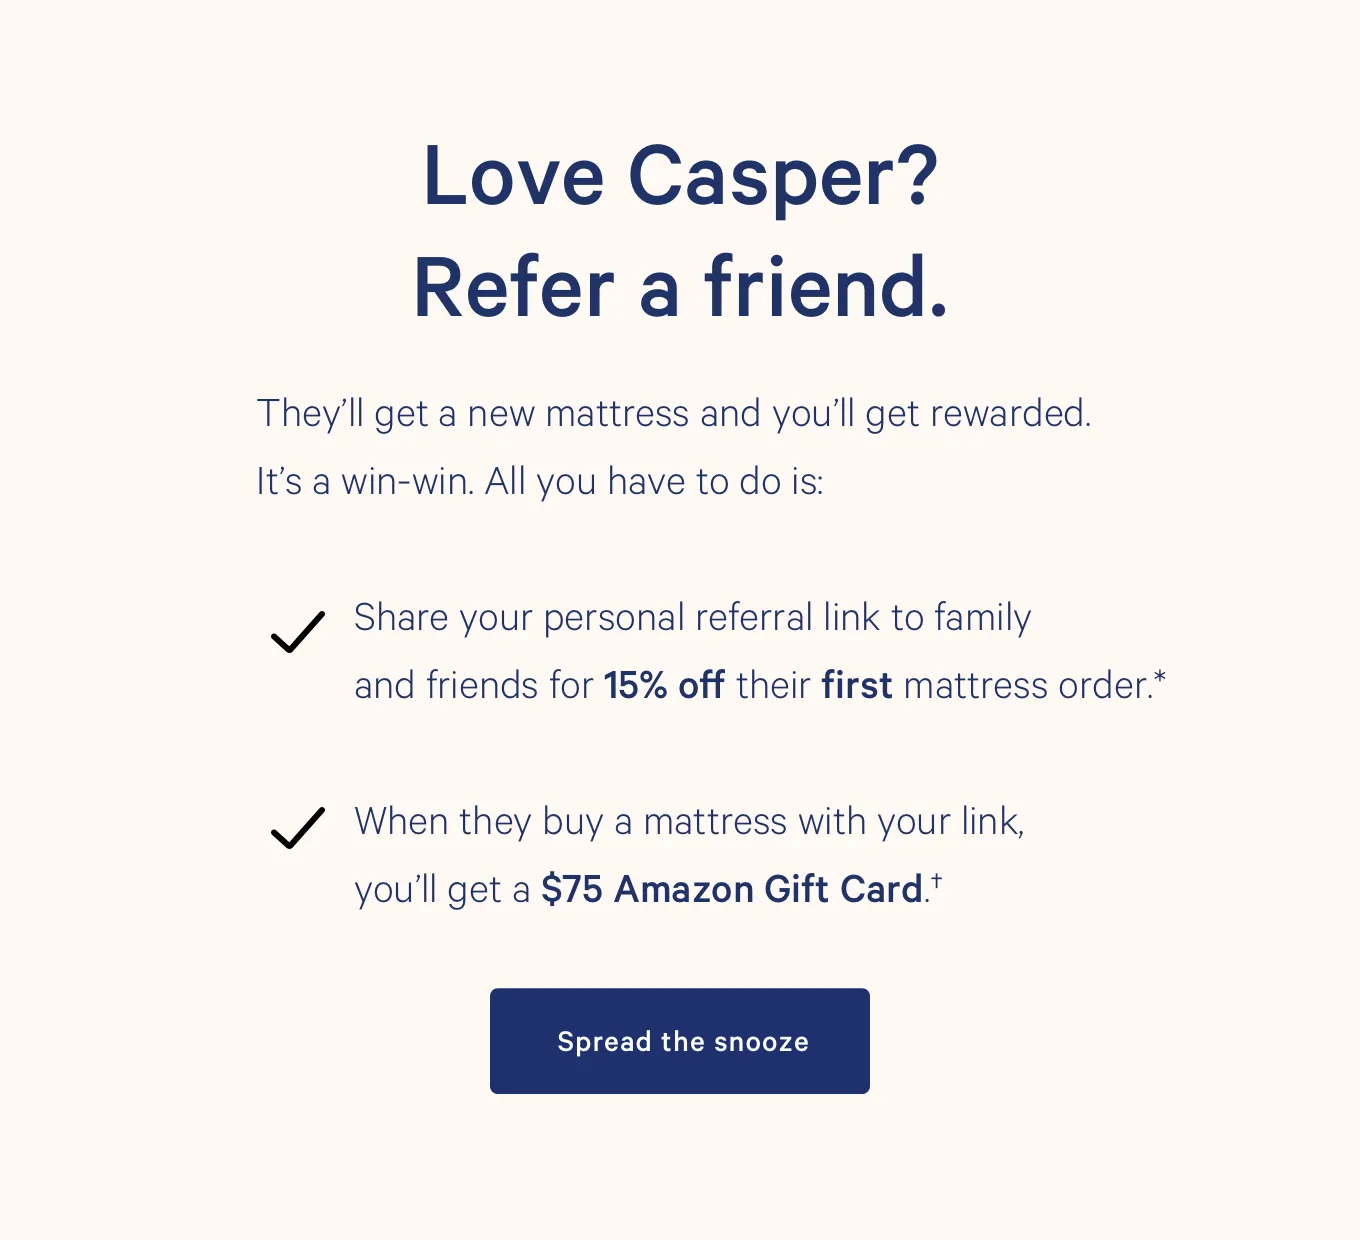 The Casper referral landing page screenshot features a dark blue title text that reads "Love Casper? Refer a friend." In a smaller, less bold font below it says, "They'll get a new mattress, and you'll get rewarded - it's a win-win. All you have to do is follow the step-by-step instructions and click the blue "Spread the Snooze" call-to-action button.”